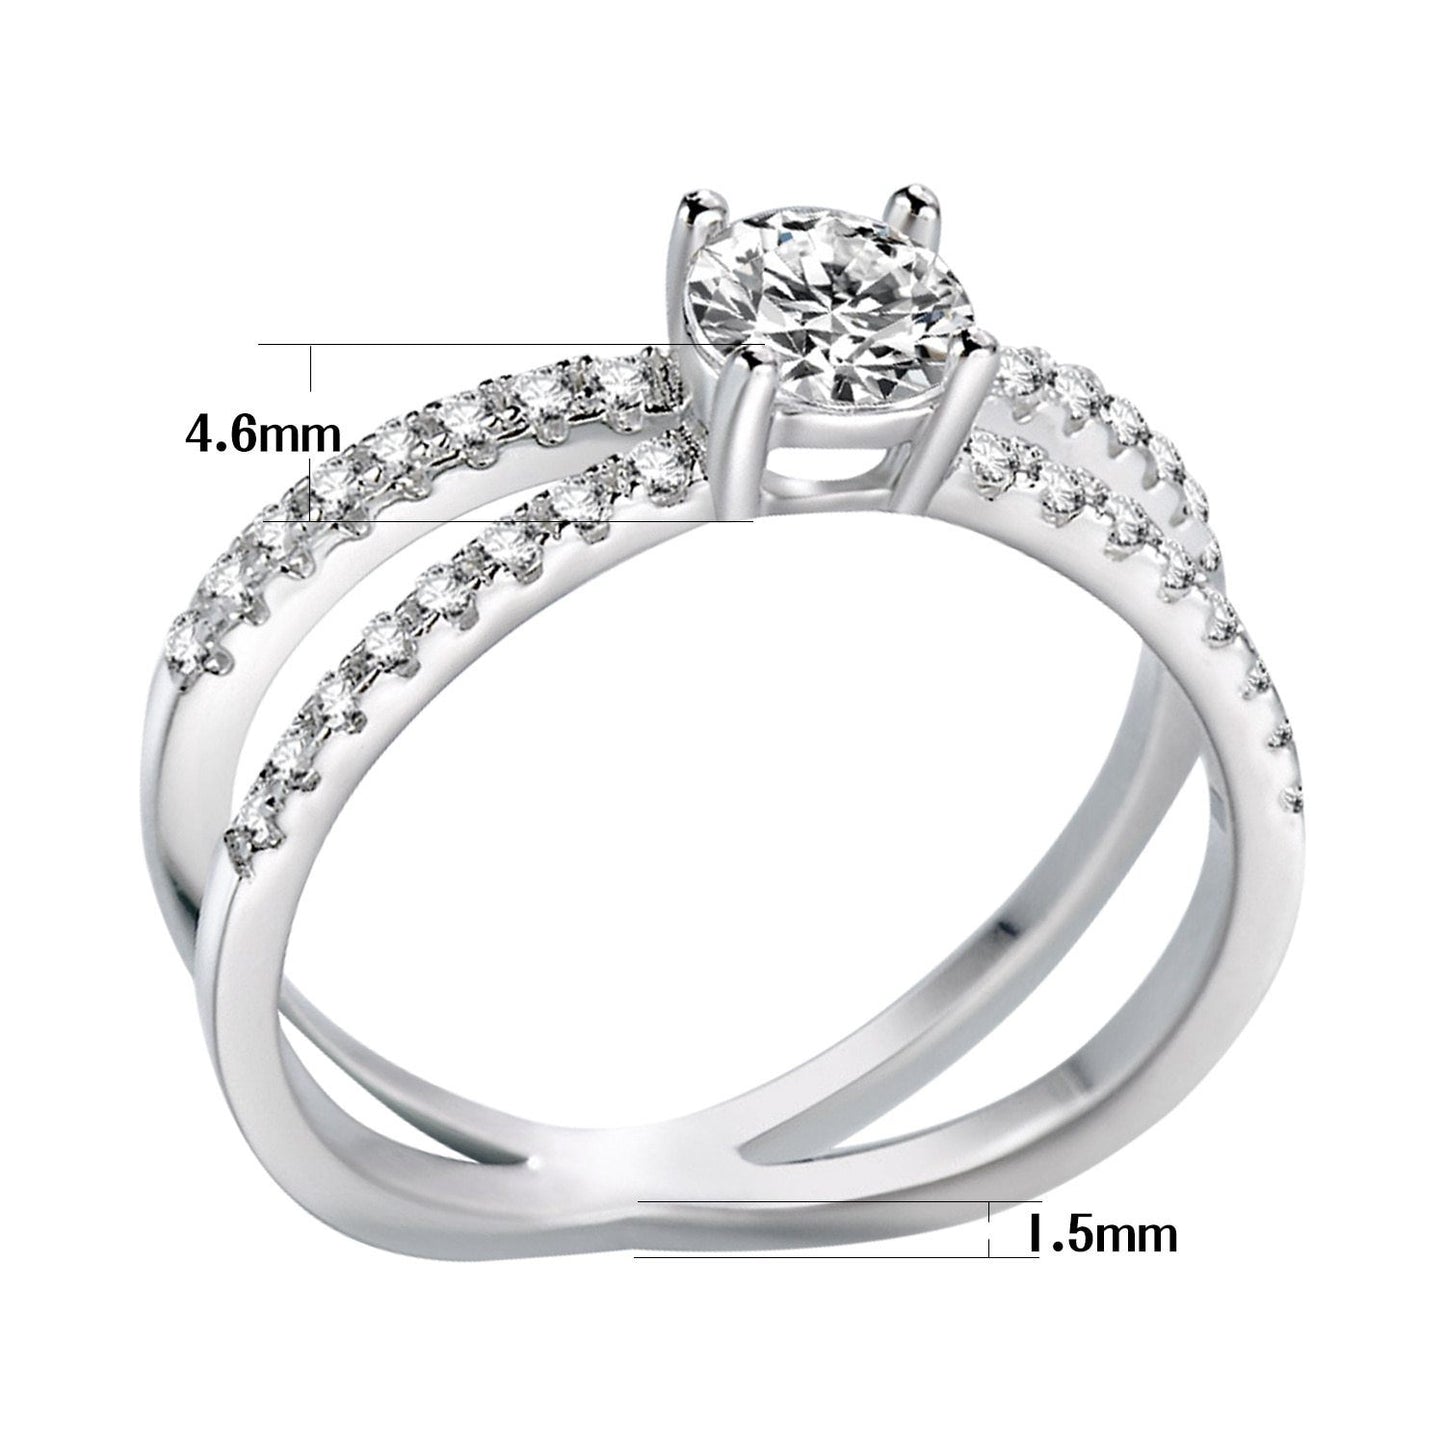 4mm 5A+ Cubic Zirconia 925 Sterling Silver Women's Ring